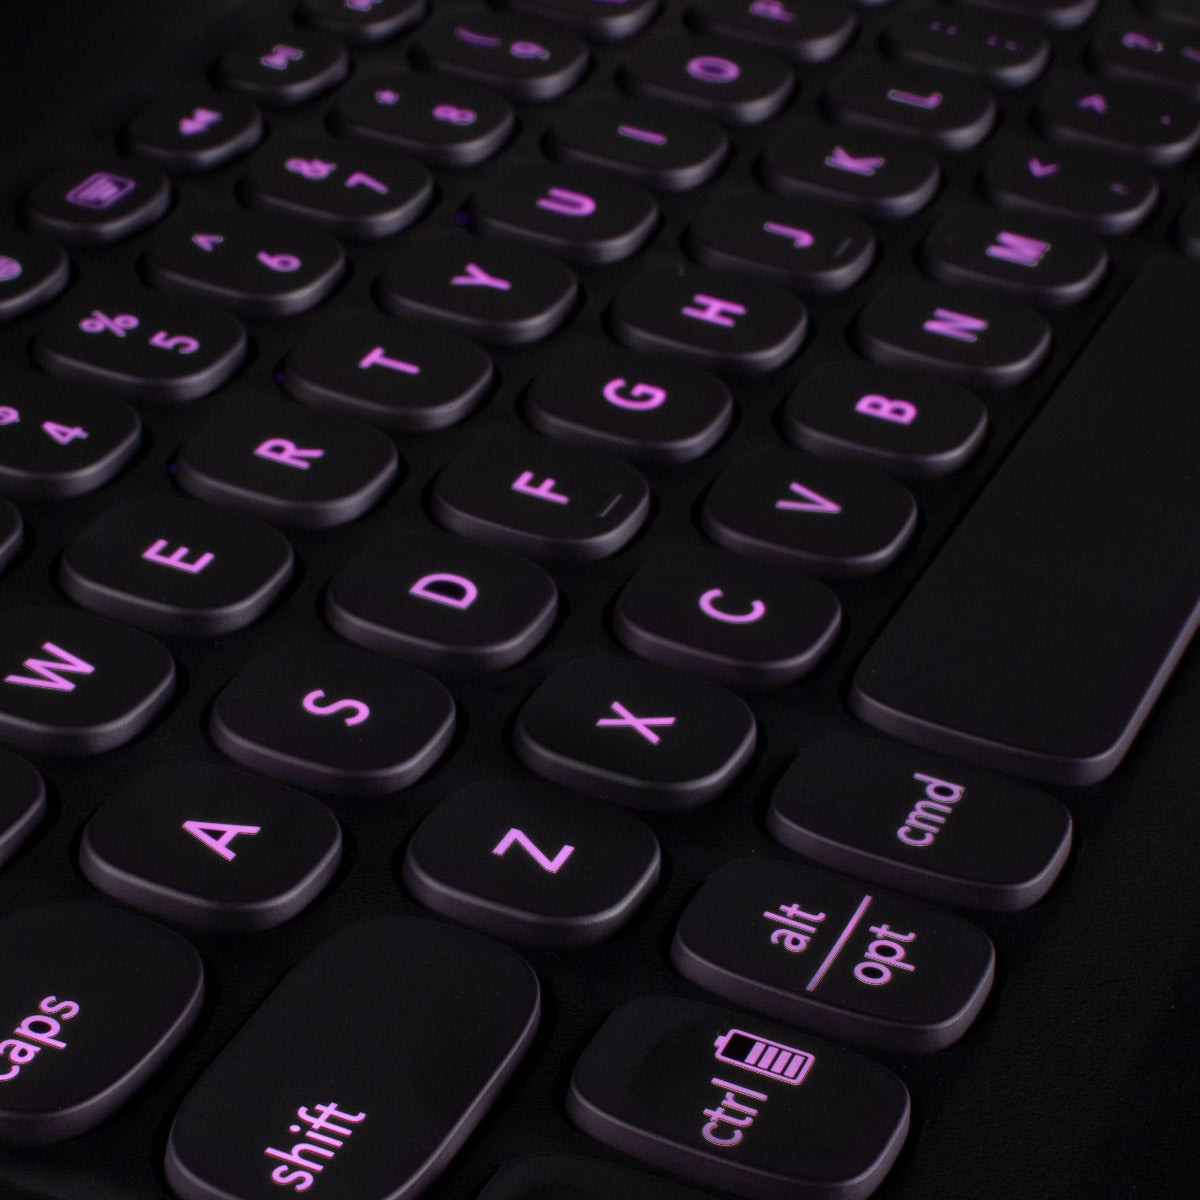 Backlit, Laptop-Style Keys||Type comfortably, even in low-light conditions, with laptop-style keys, backlit in seven different colors.